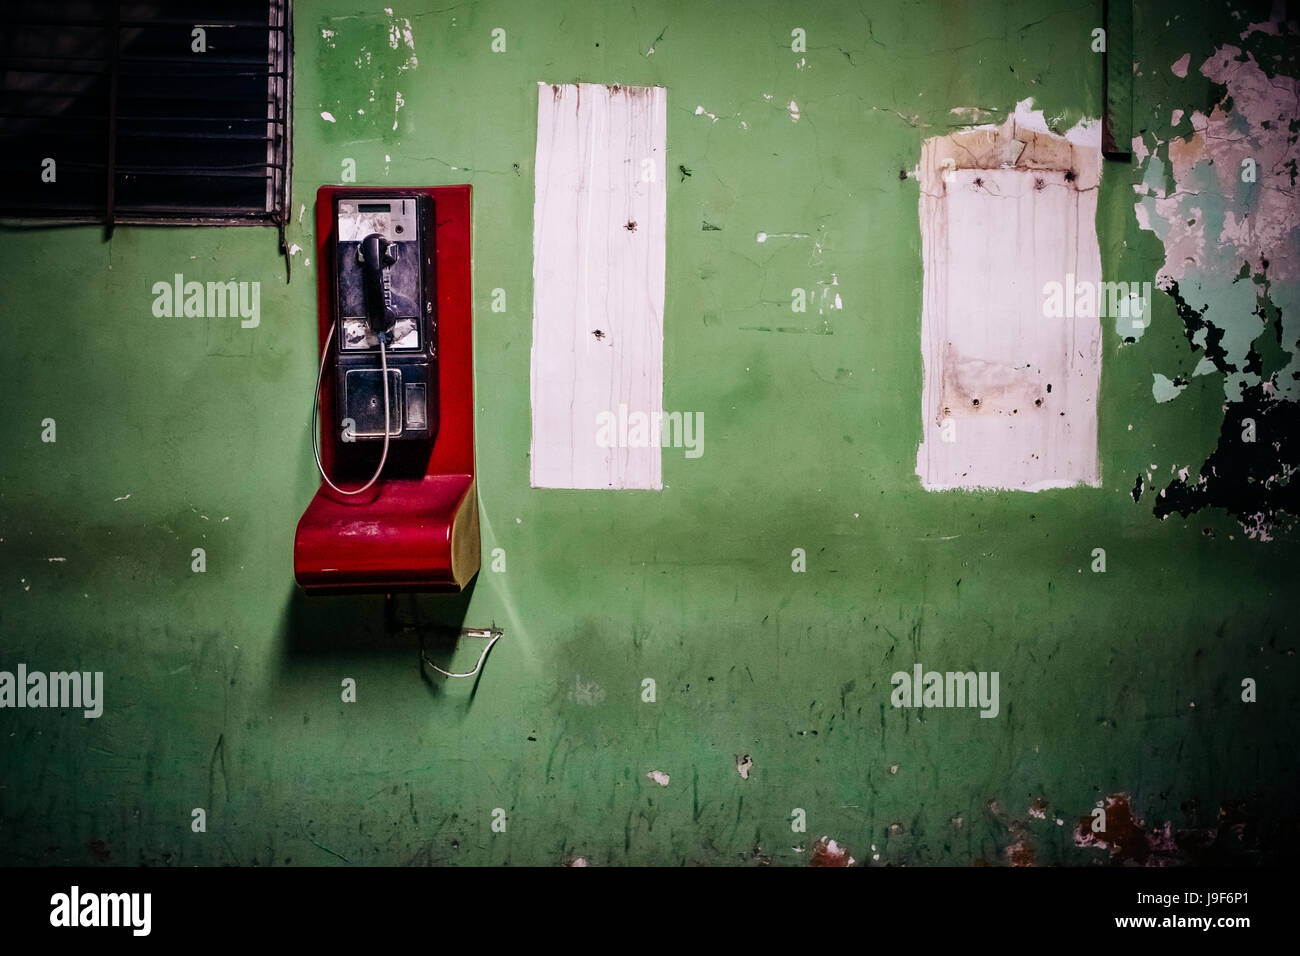 A public pay phone is seen hung on the wall in a patio inside the emergency department of a public hospital in San Salvador, El Salvador, 16 December 2015. Stock Photo